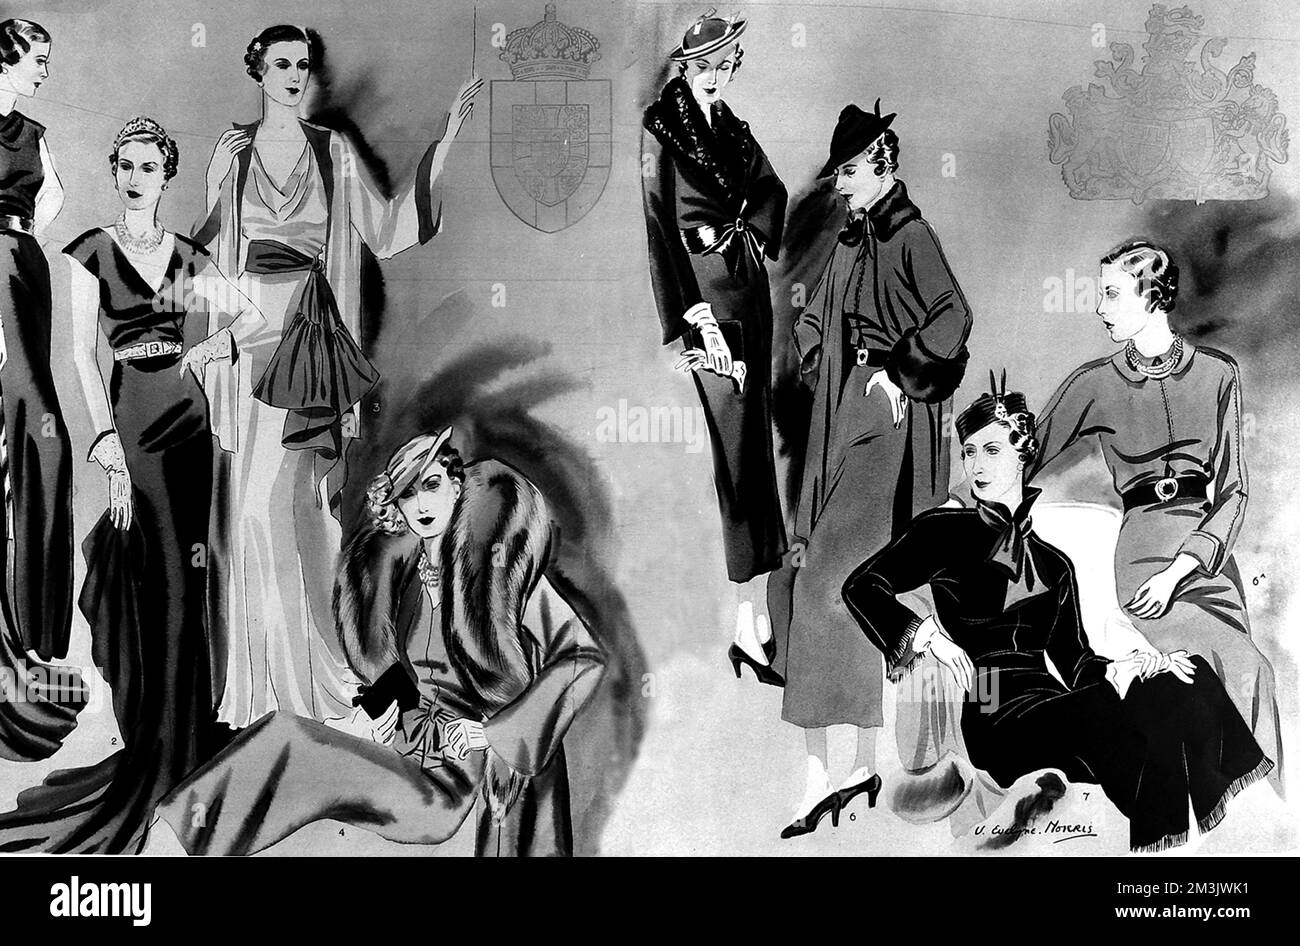 A montage of illustrations showing the various elegant and fashionable outfits which formed part of the Duchess of Kent's (formerly Princess Marina of Greece) trousseau on marrying, Prince George, Duke of Kent in 1934.     Date: 1934 Stock Photo